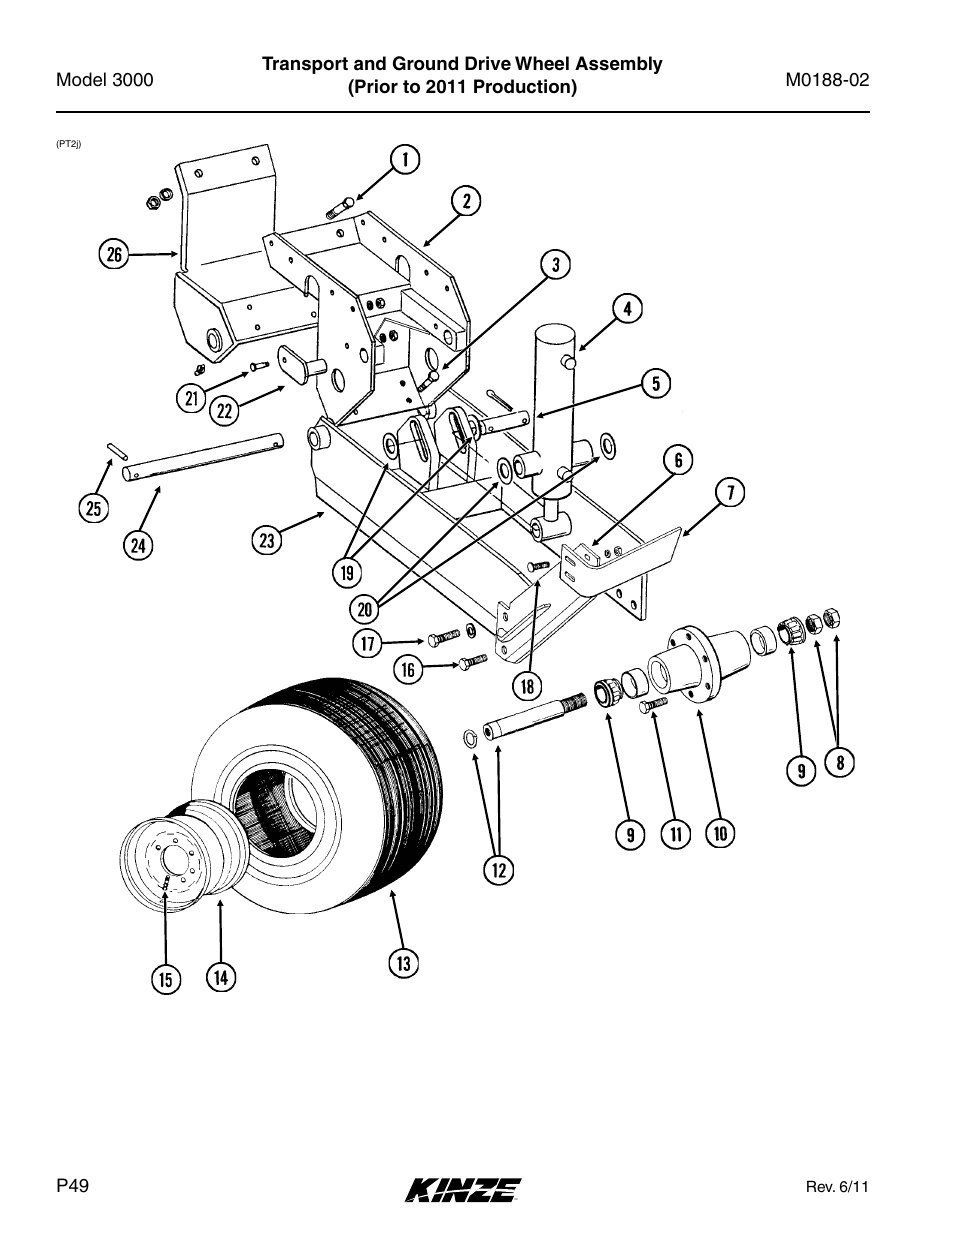 Transport and ground drive wheel assembly | Kinze 3000 Rigid Frame Planter Rev. 5/14 User Manual | Page 52 / 154